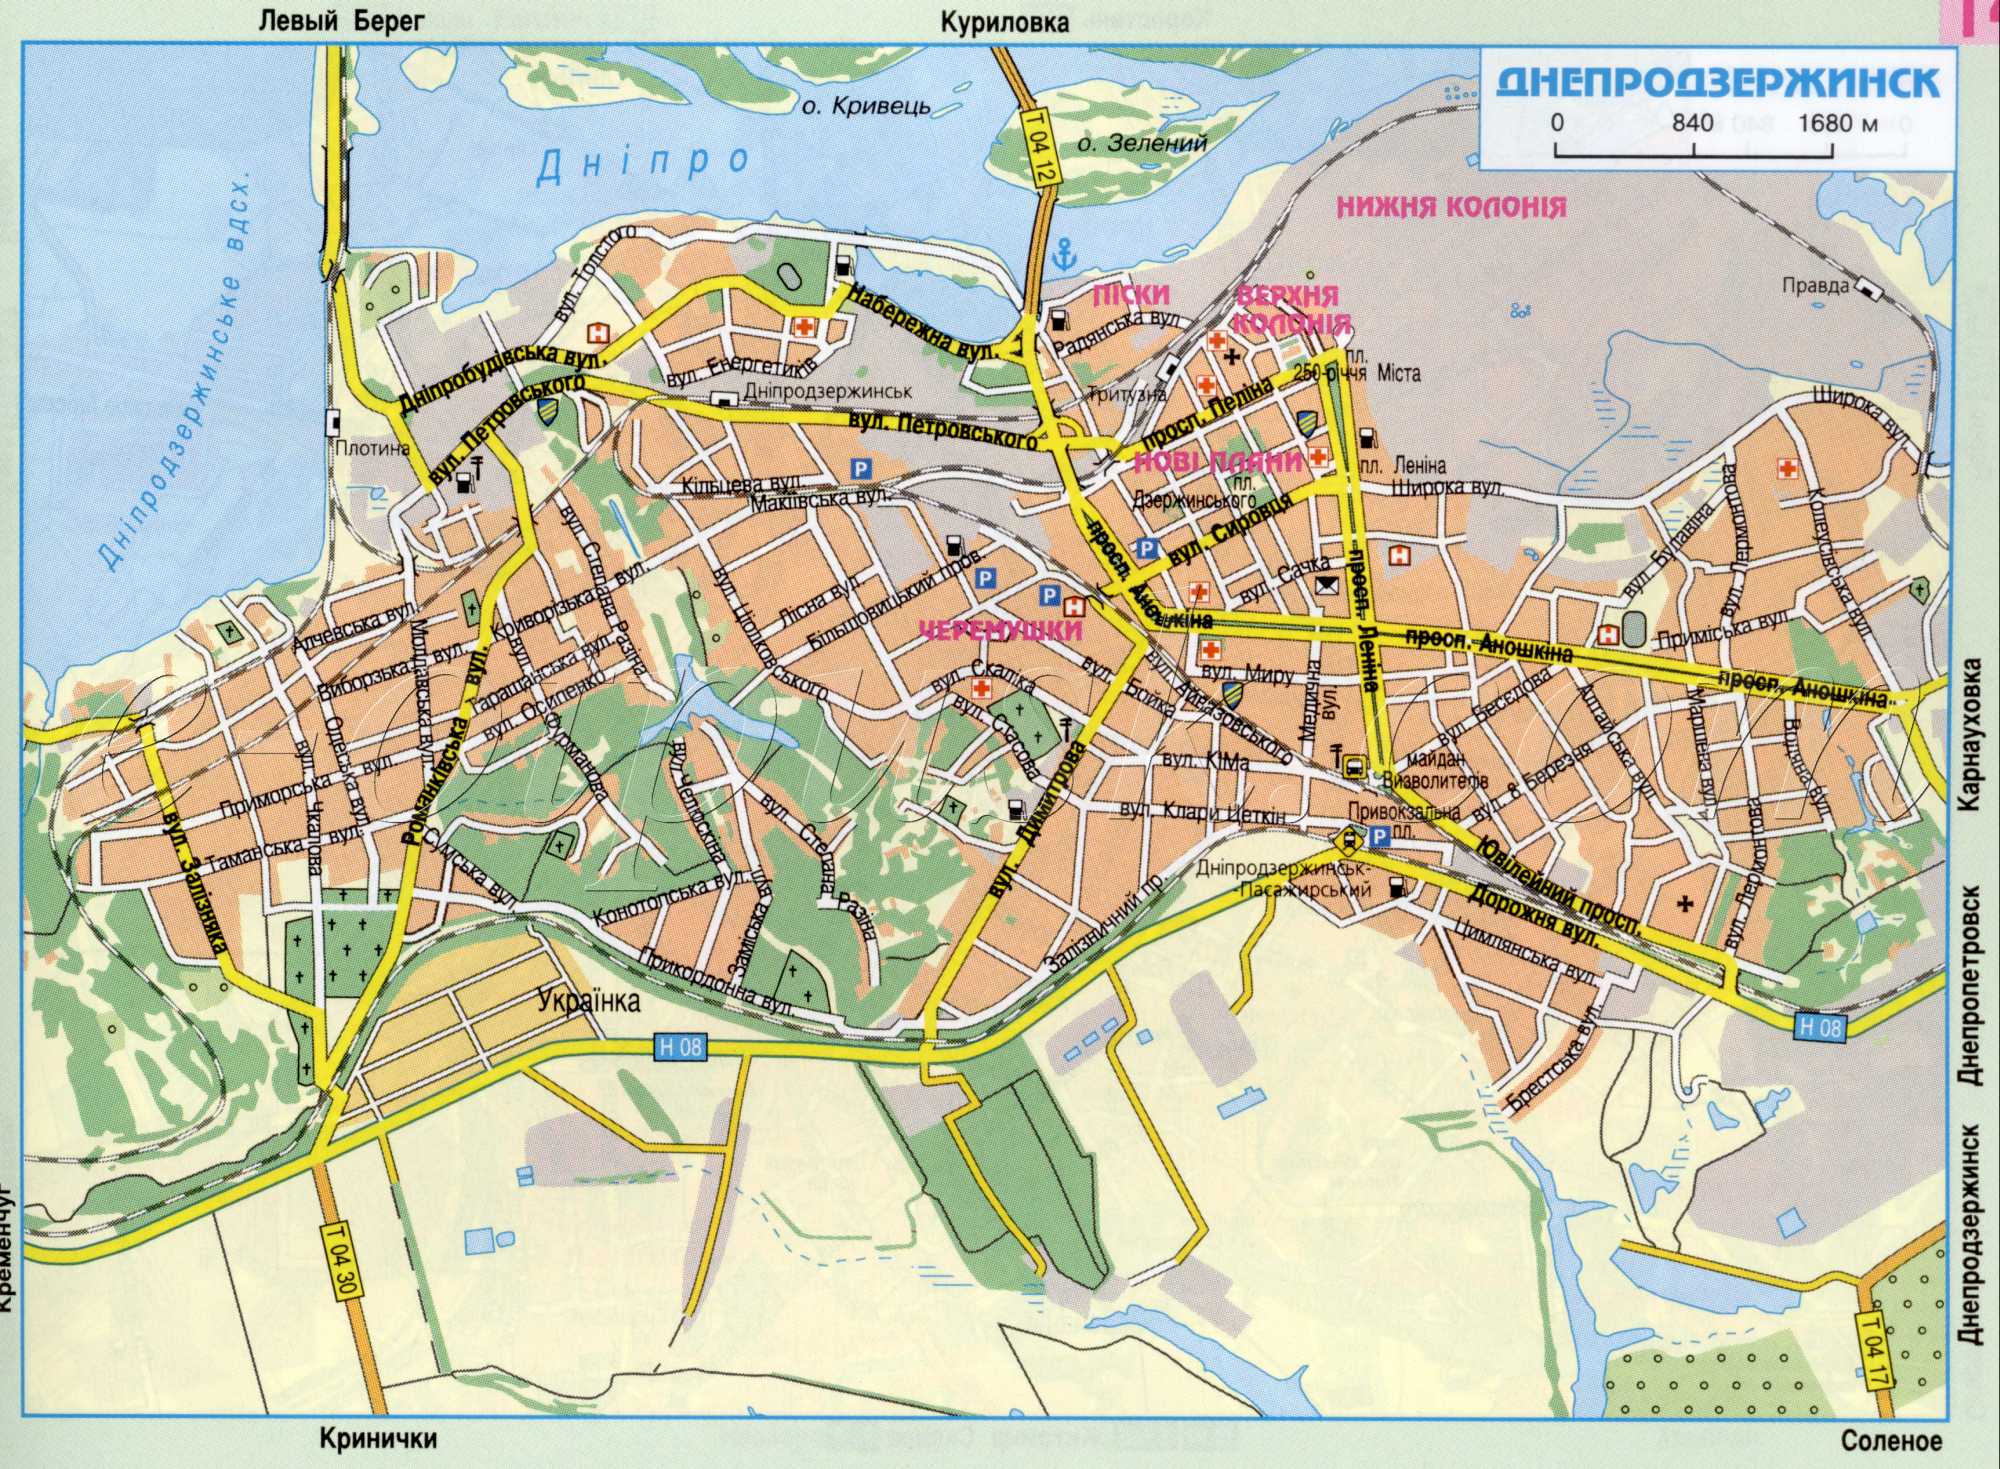 Map Dneprodzerzhinsk (until 1936 the city was called Kamenskoe) Dnipropetrovsk region. Download for free